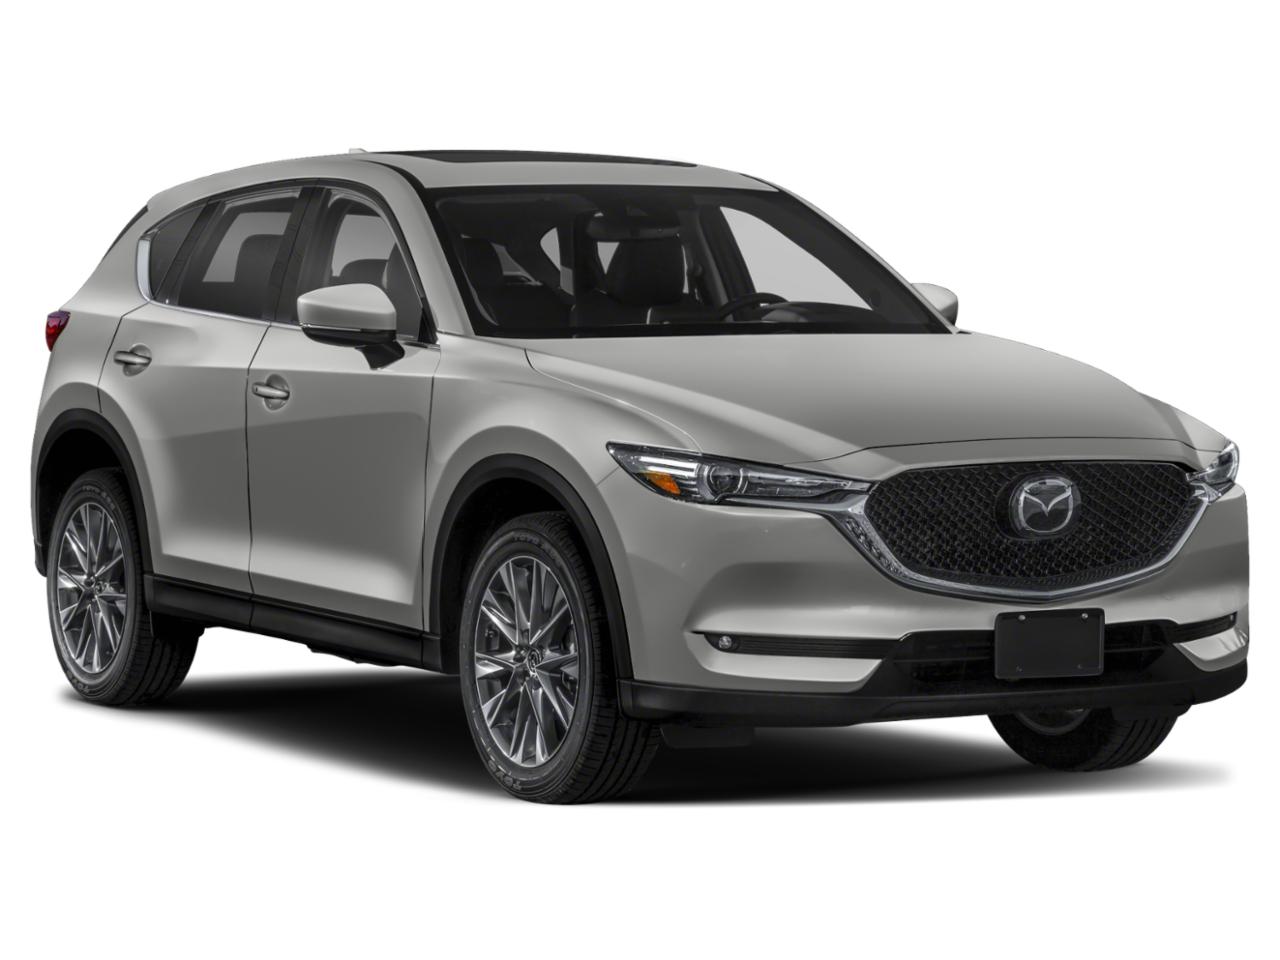 New 2020 Mazda CX-5 (Deep Crystal Blue Mica) for Sale in Rockville ...